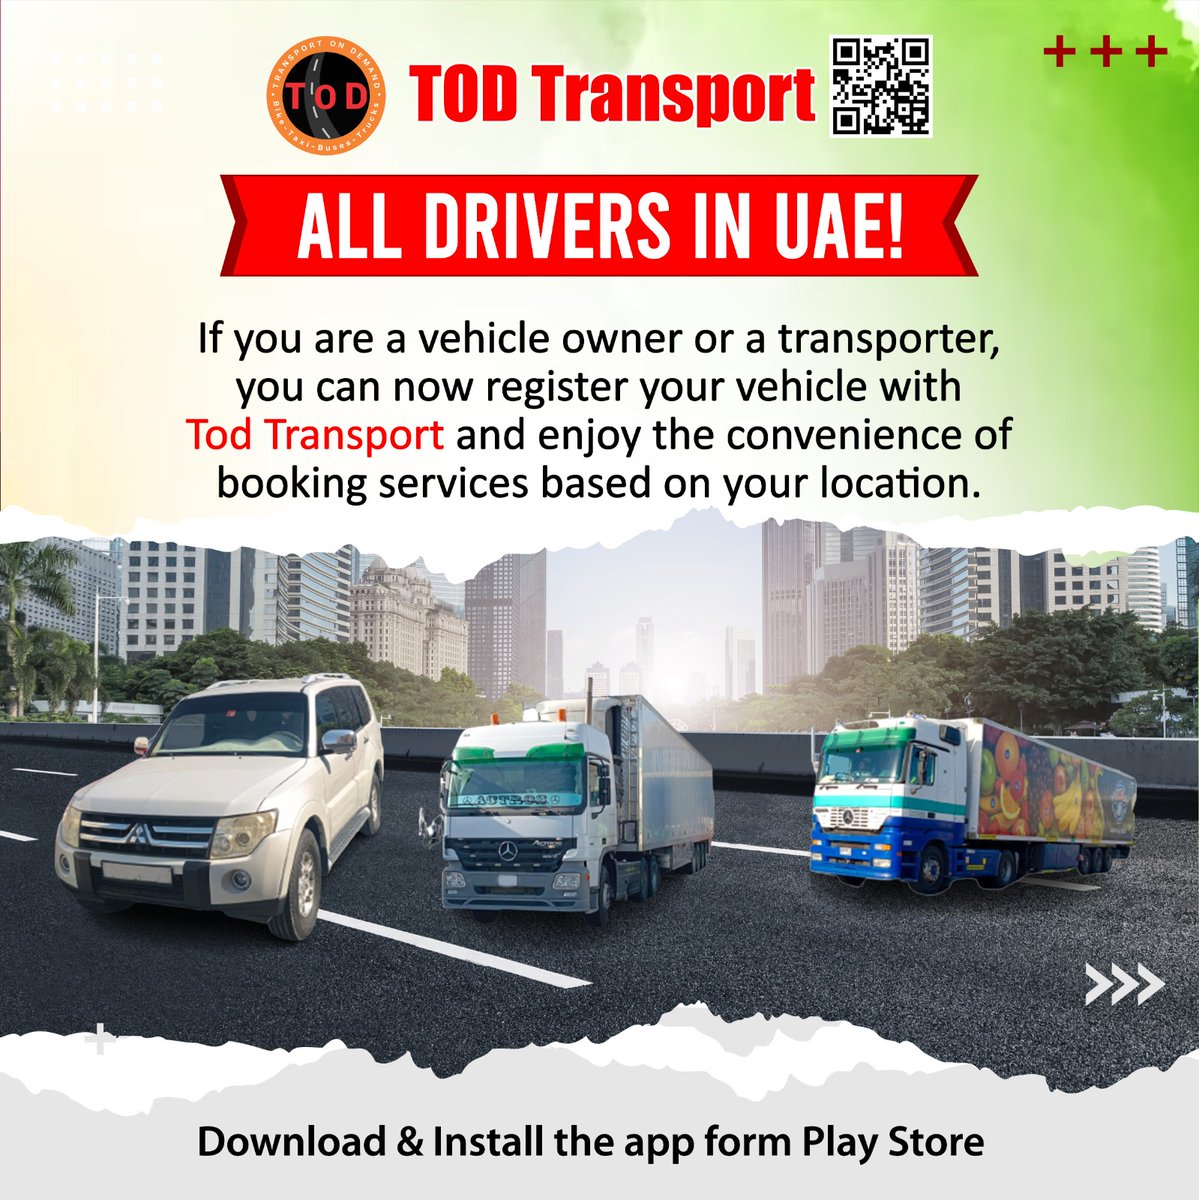 🚗📲 Vehicle owners and transporters, simplify your travels with TOD Transport UAE! Enjoy 6 MONTHS of FREE bookings from registration date. Seamlessly book services based on your location. Don't miss out on this exclusive offer! #TODTransportUAE #EffortlessJourneys #SmartBooking